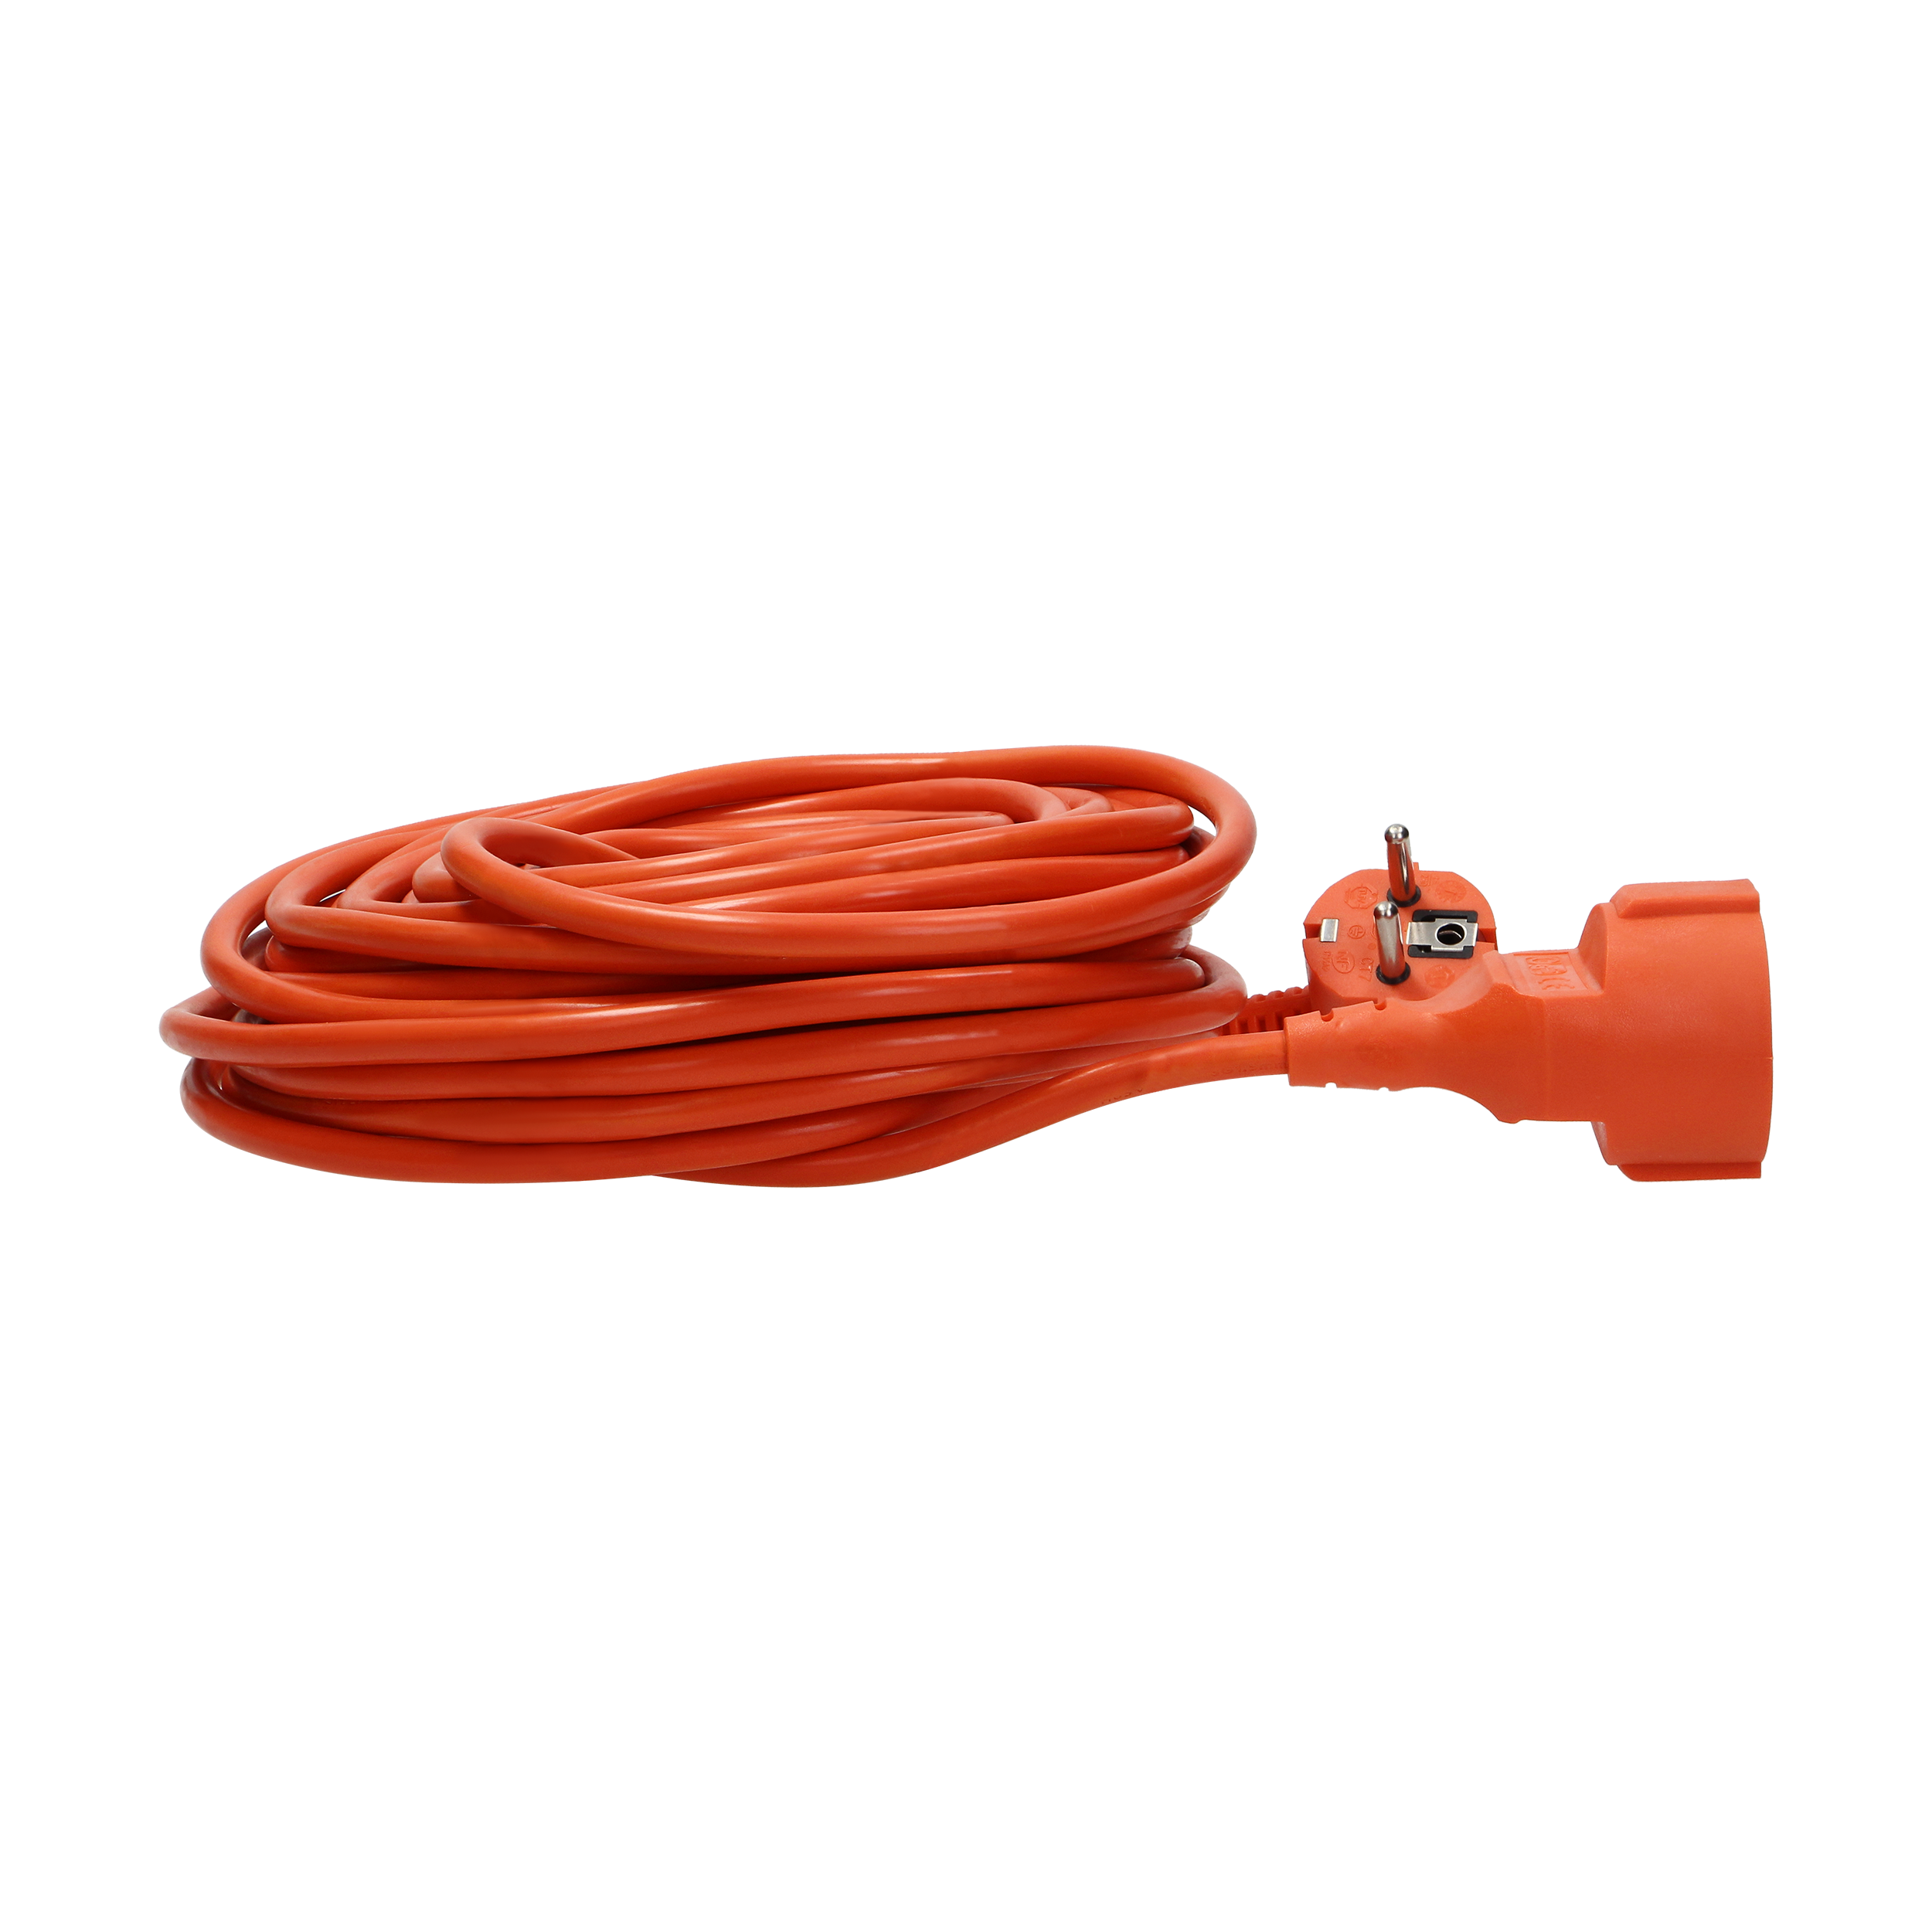 Garden extension cord with 1 Schuko socket, PVC 3x1.5mm², 40m long ...